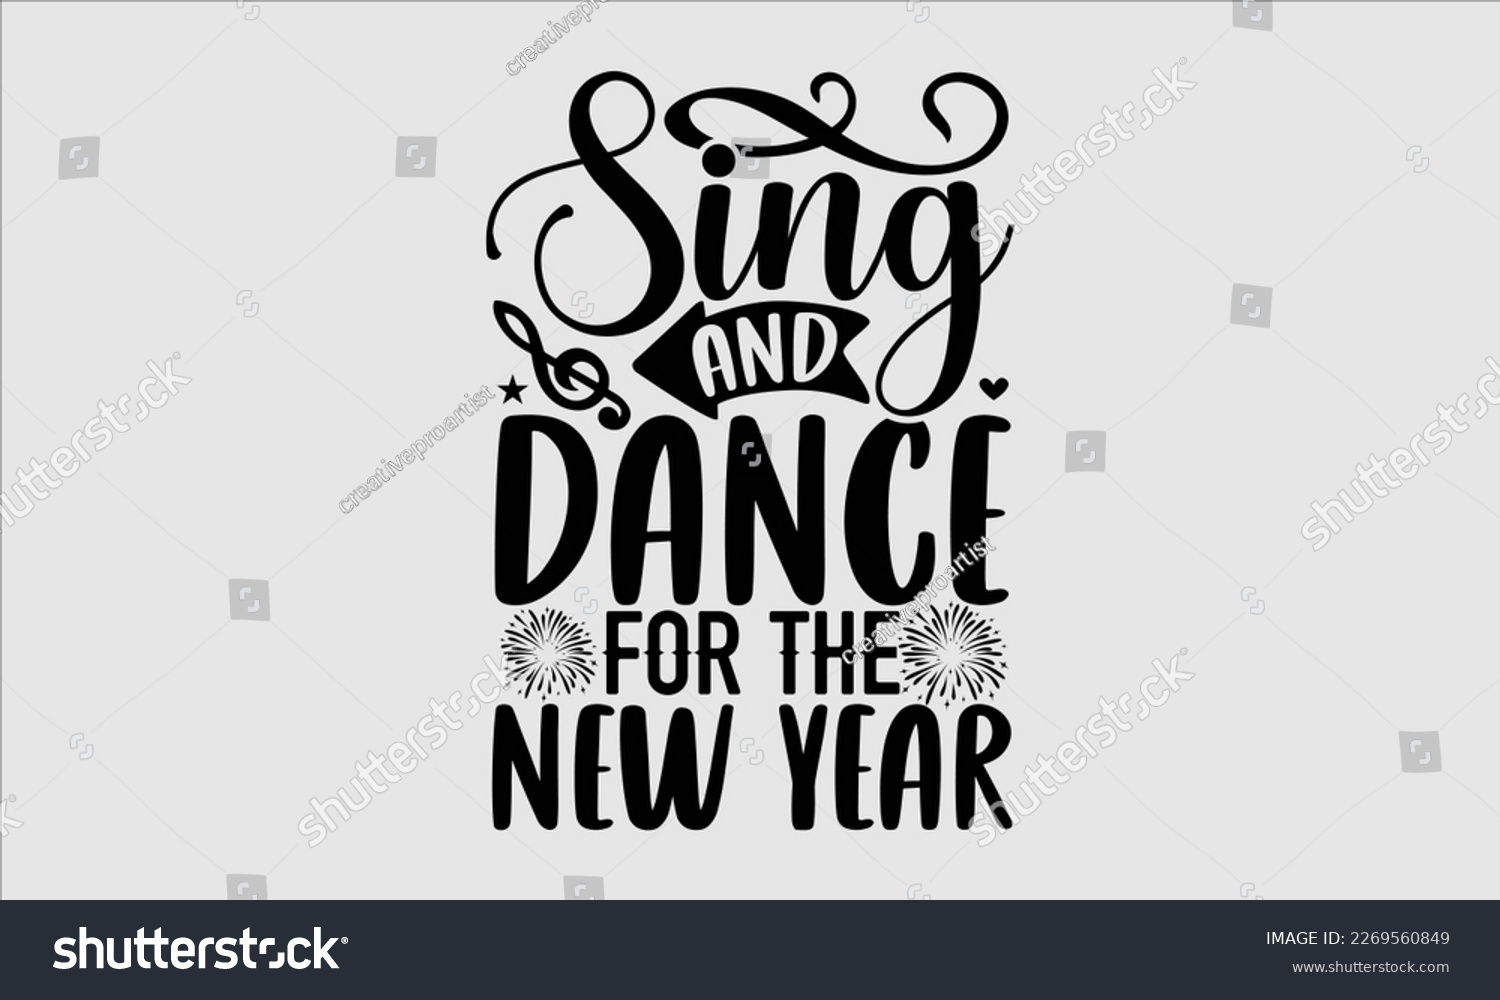 SVG of Sing And Dance For The New Year- Happy New Year t shirt Design, lettering vector illustration isolated on white background, gift and other printing Svg and bags, posters. eps 10 svg